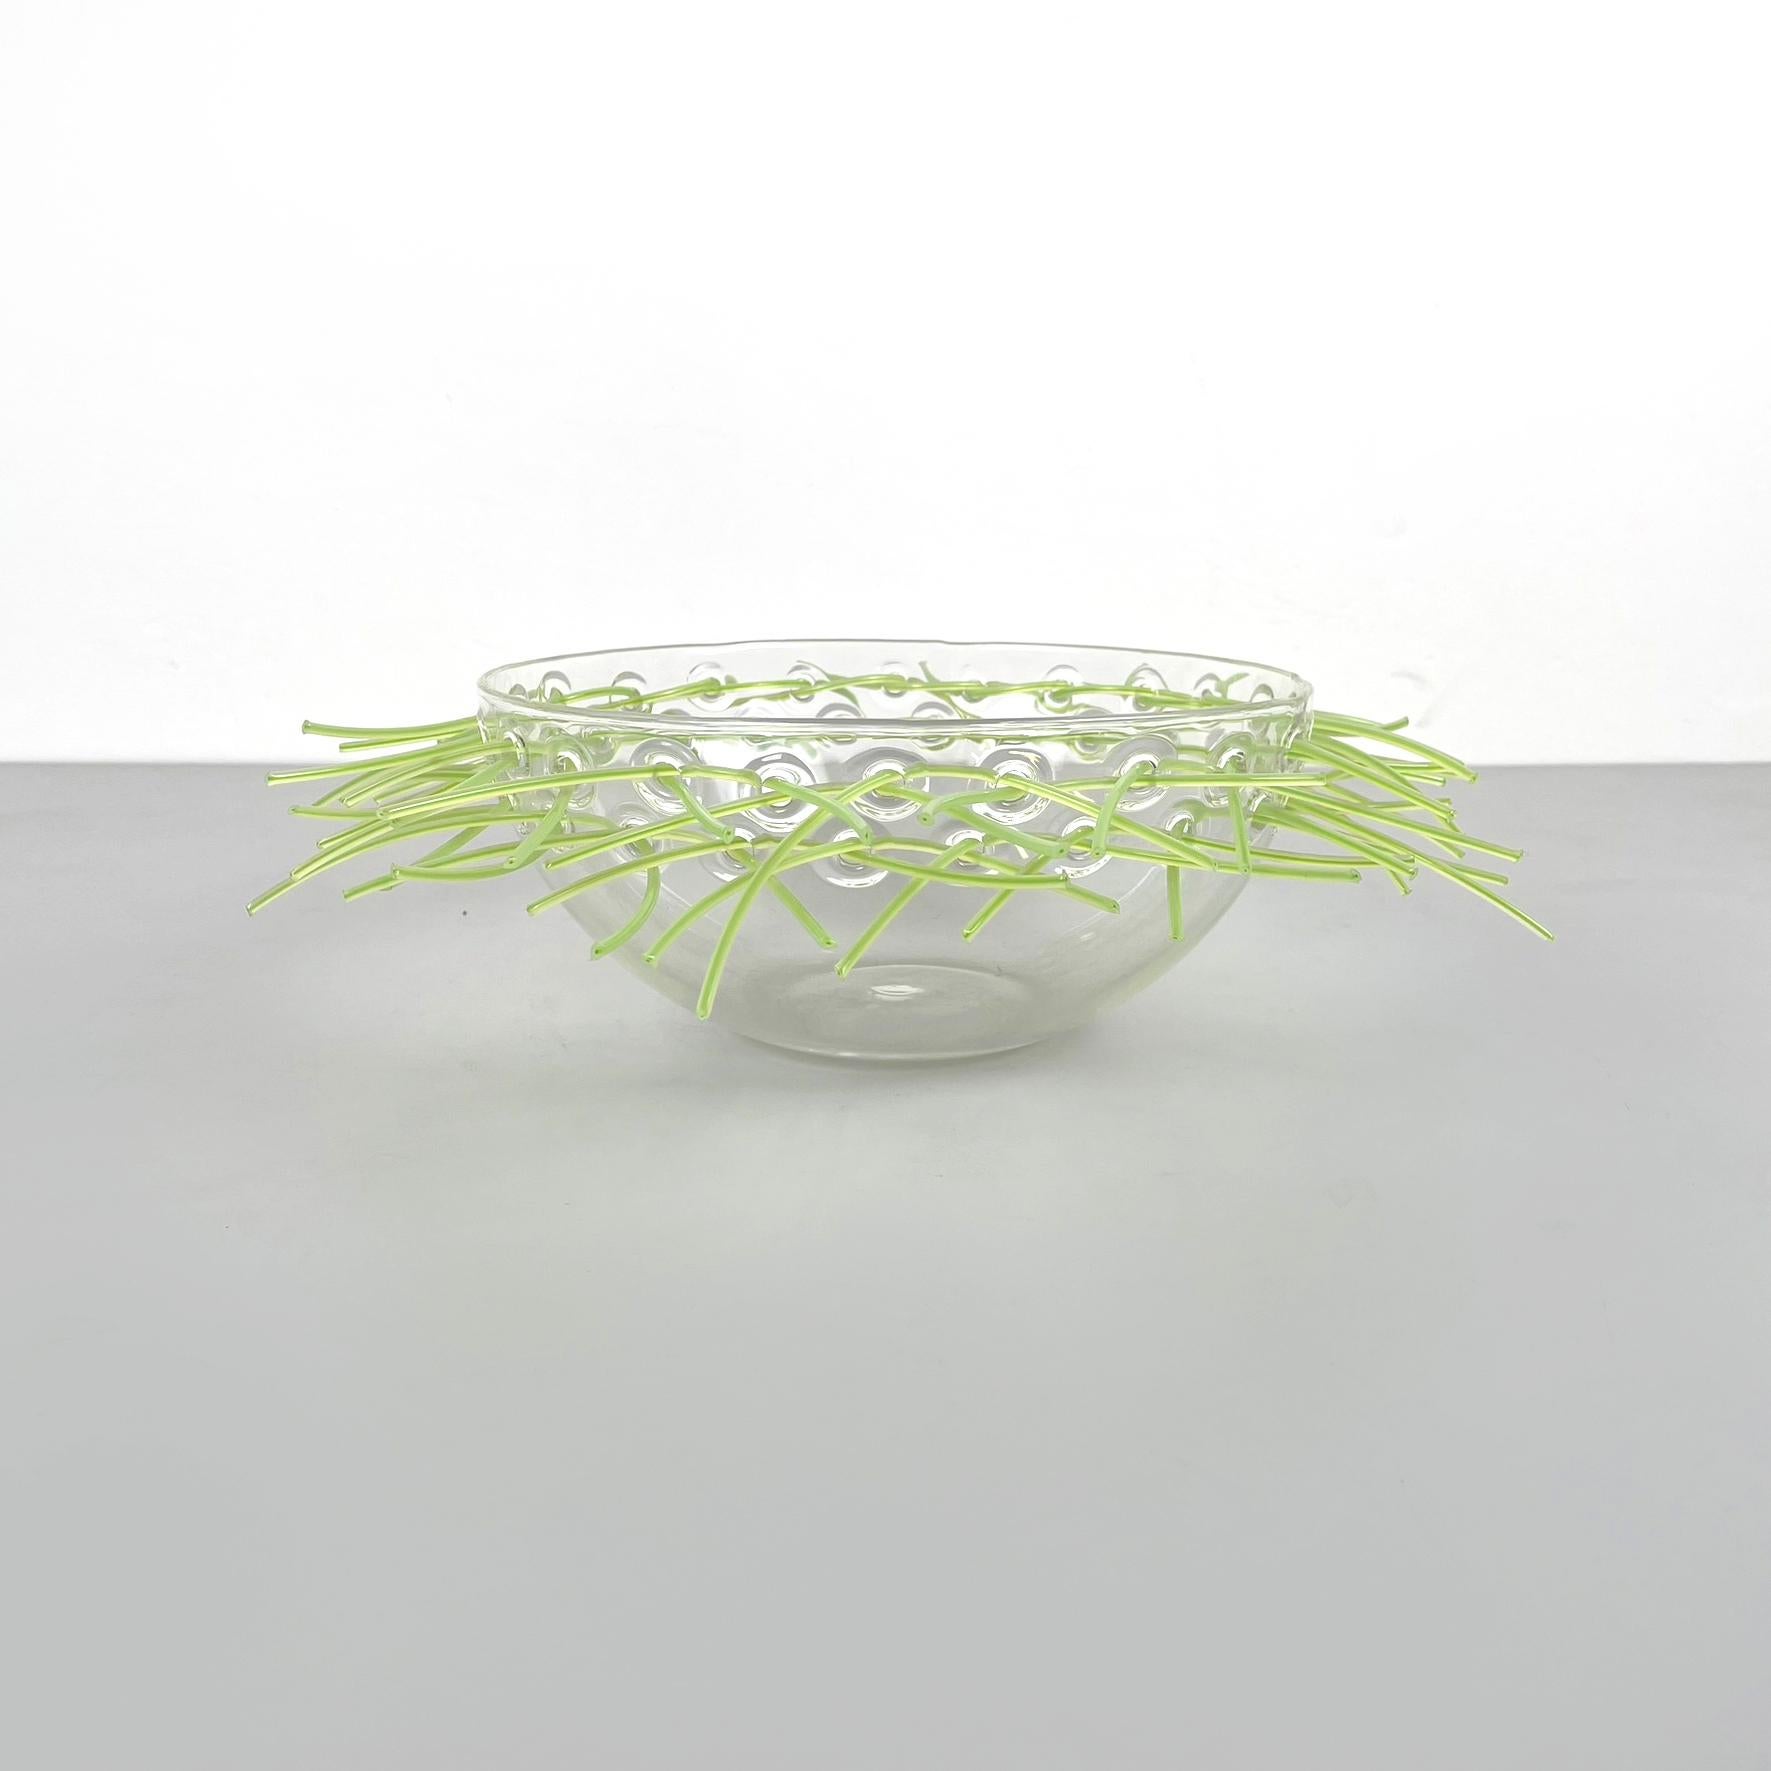 Italian post-modern Glass and green plastic Pocket emptier bowl by Cleto Munari, 2000s
Hemispherical pocket emptier bowl in perforated glass. There are small threads of light green plastic in the holes. Can be used as a centerpiece.
Produced and